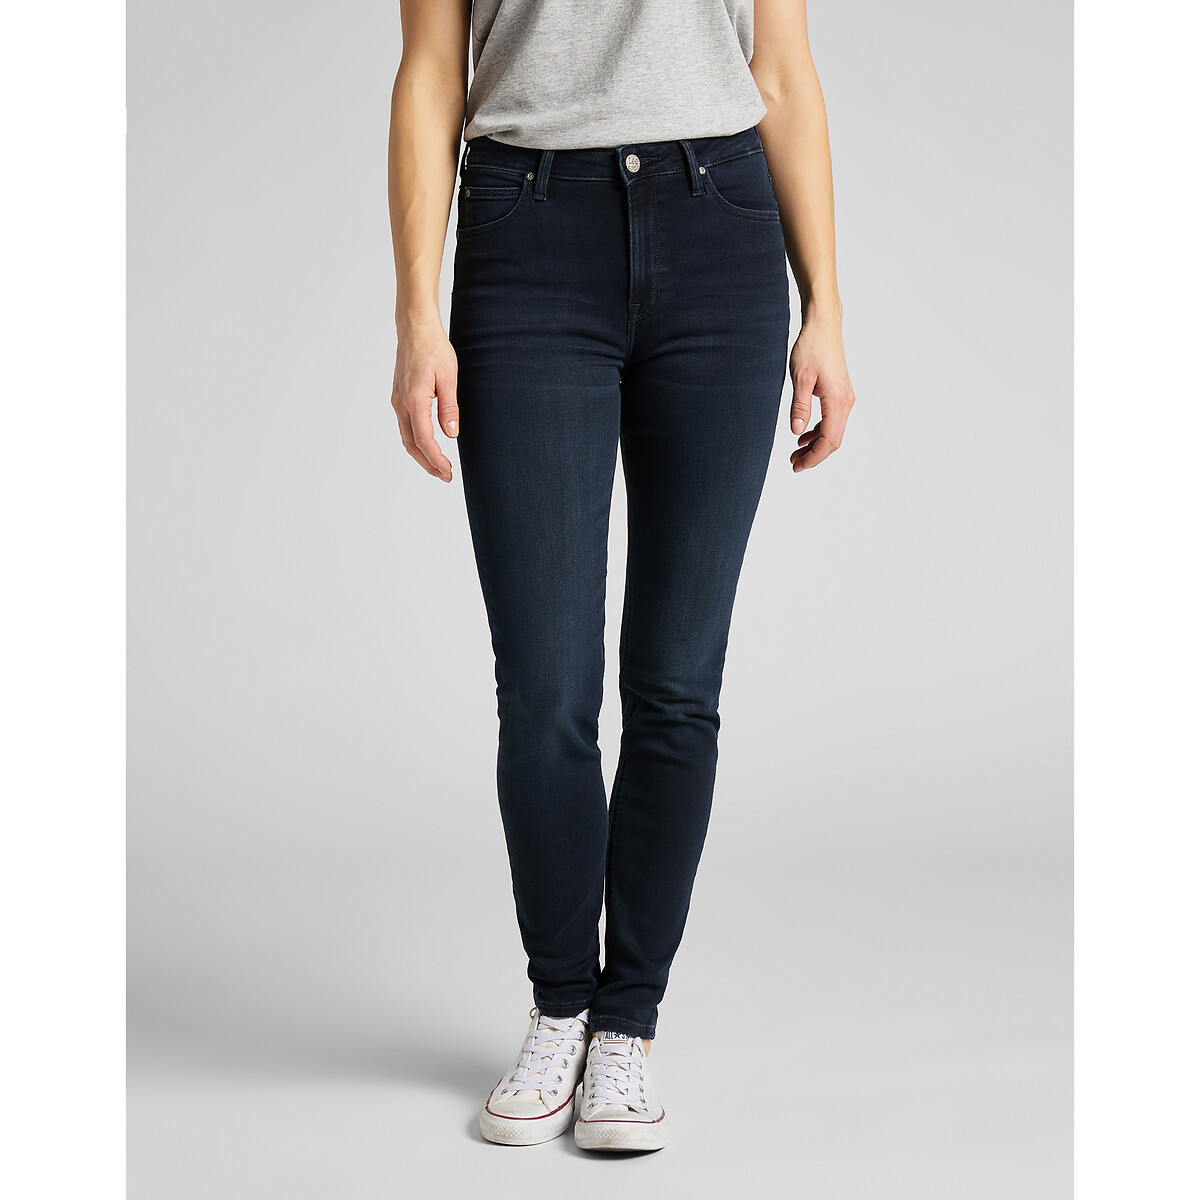 Image of Scarlett Skinny Jeans with High Waist